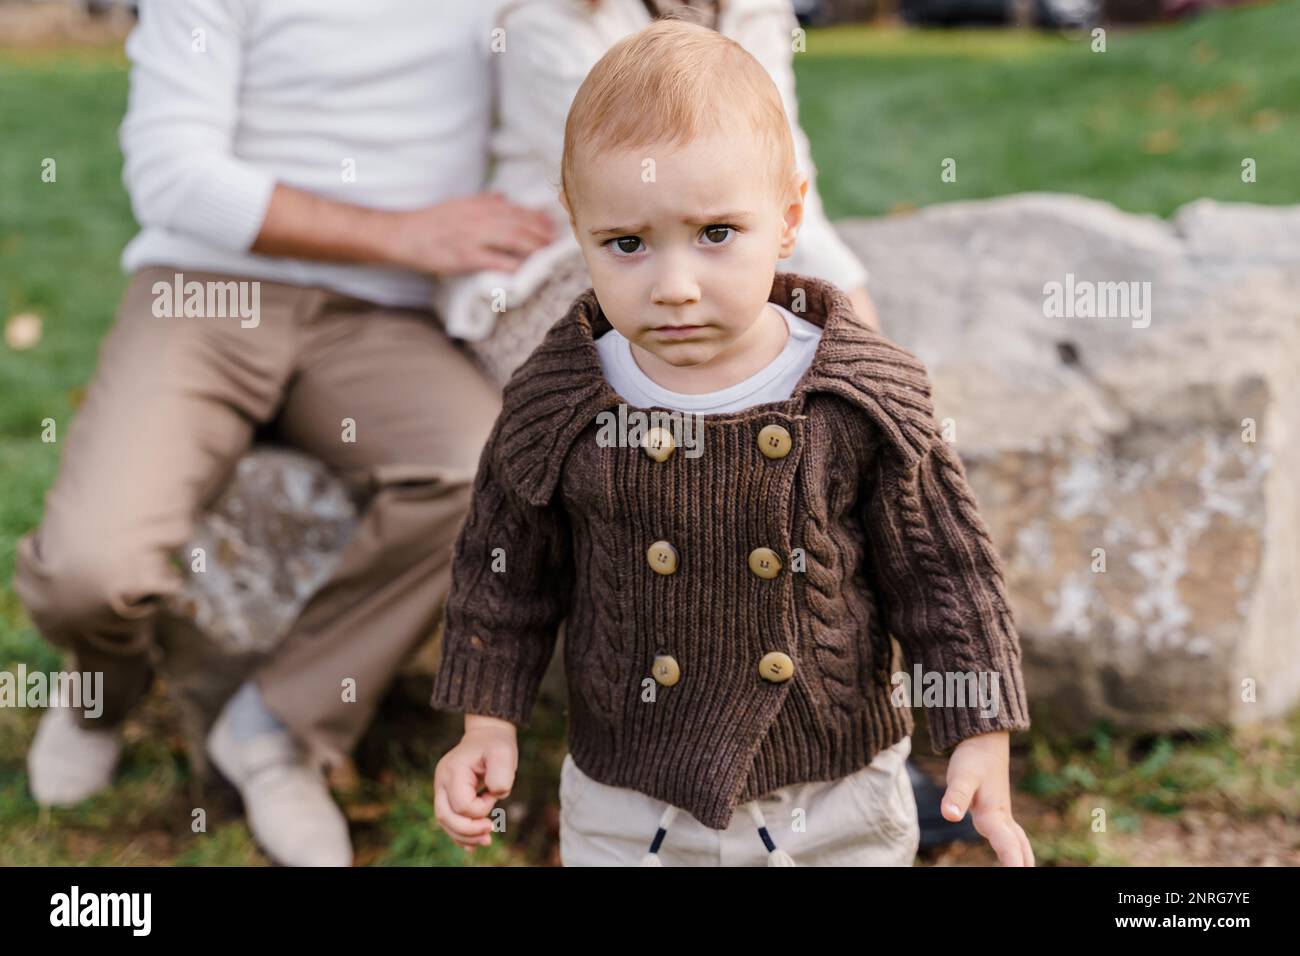 A brown-eyed Caucasian baby boy toddler in a brown knitted sweater Stock Photo